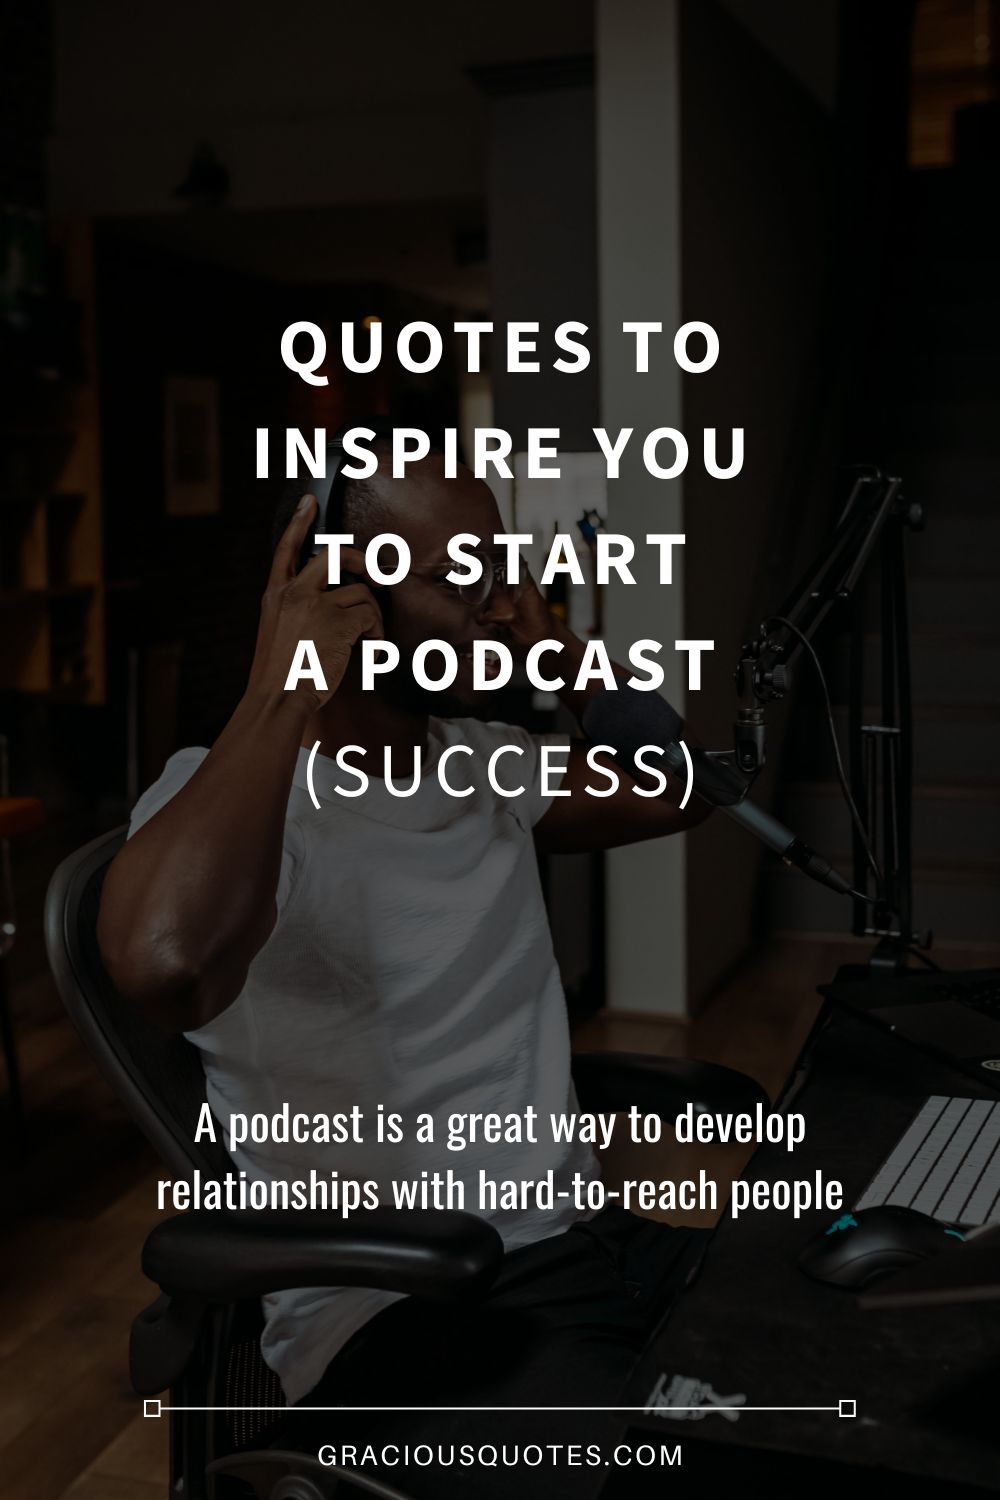 Quotes to Inspire You to Start a Podcast (SUCCESS) - Gracious Quotes